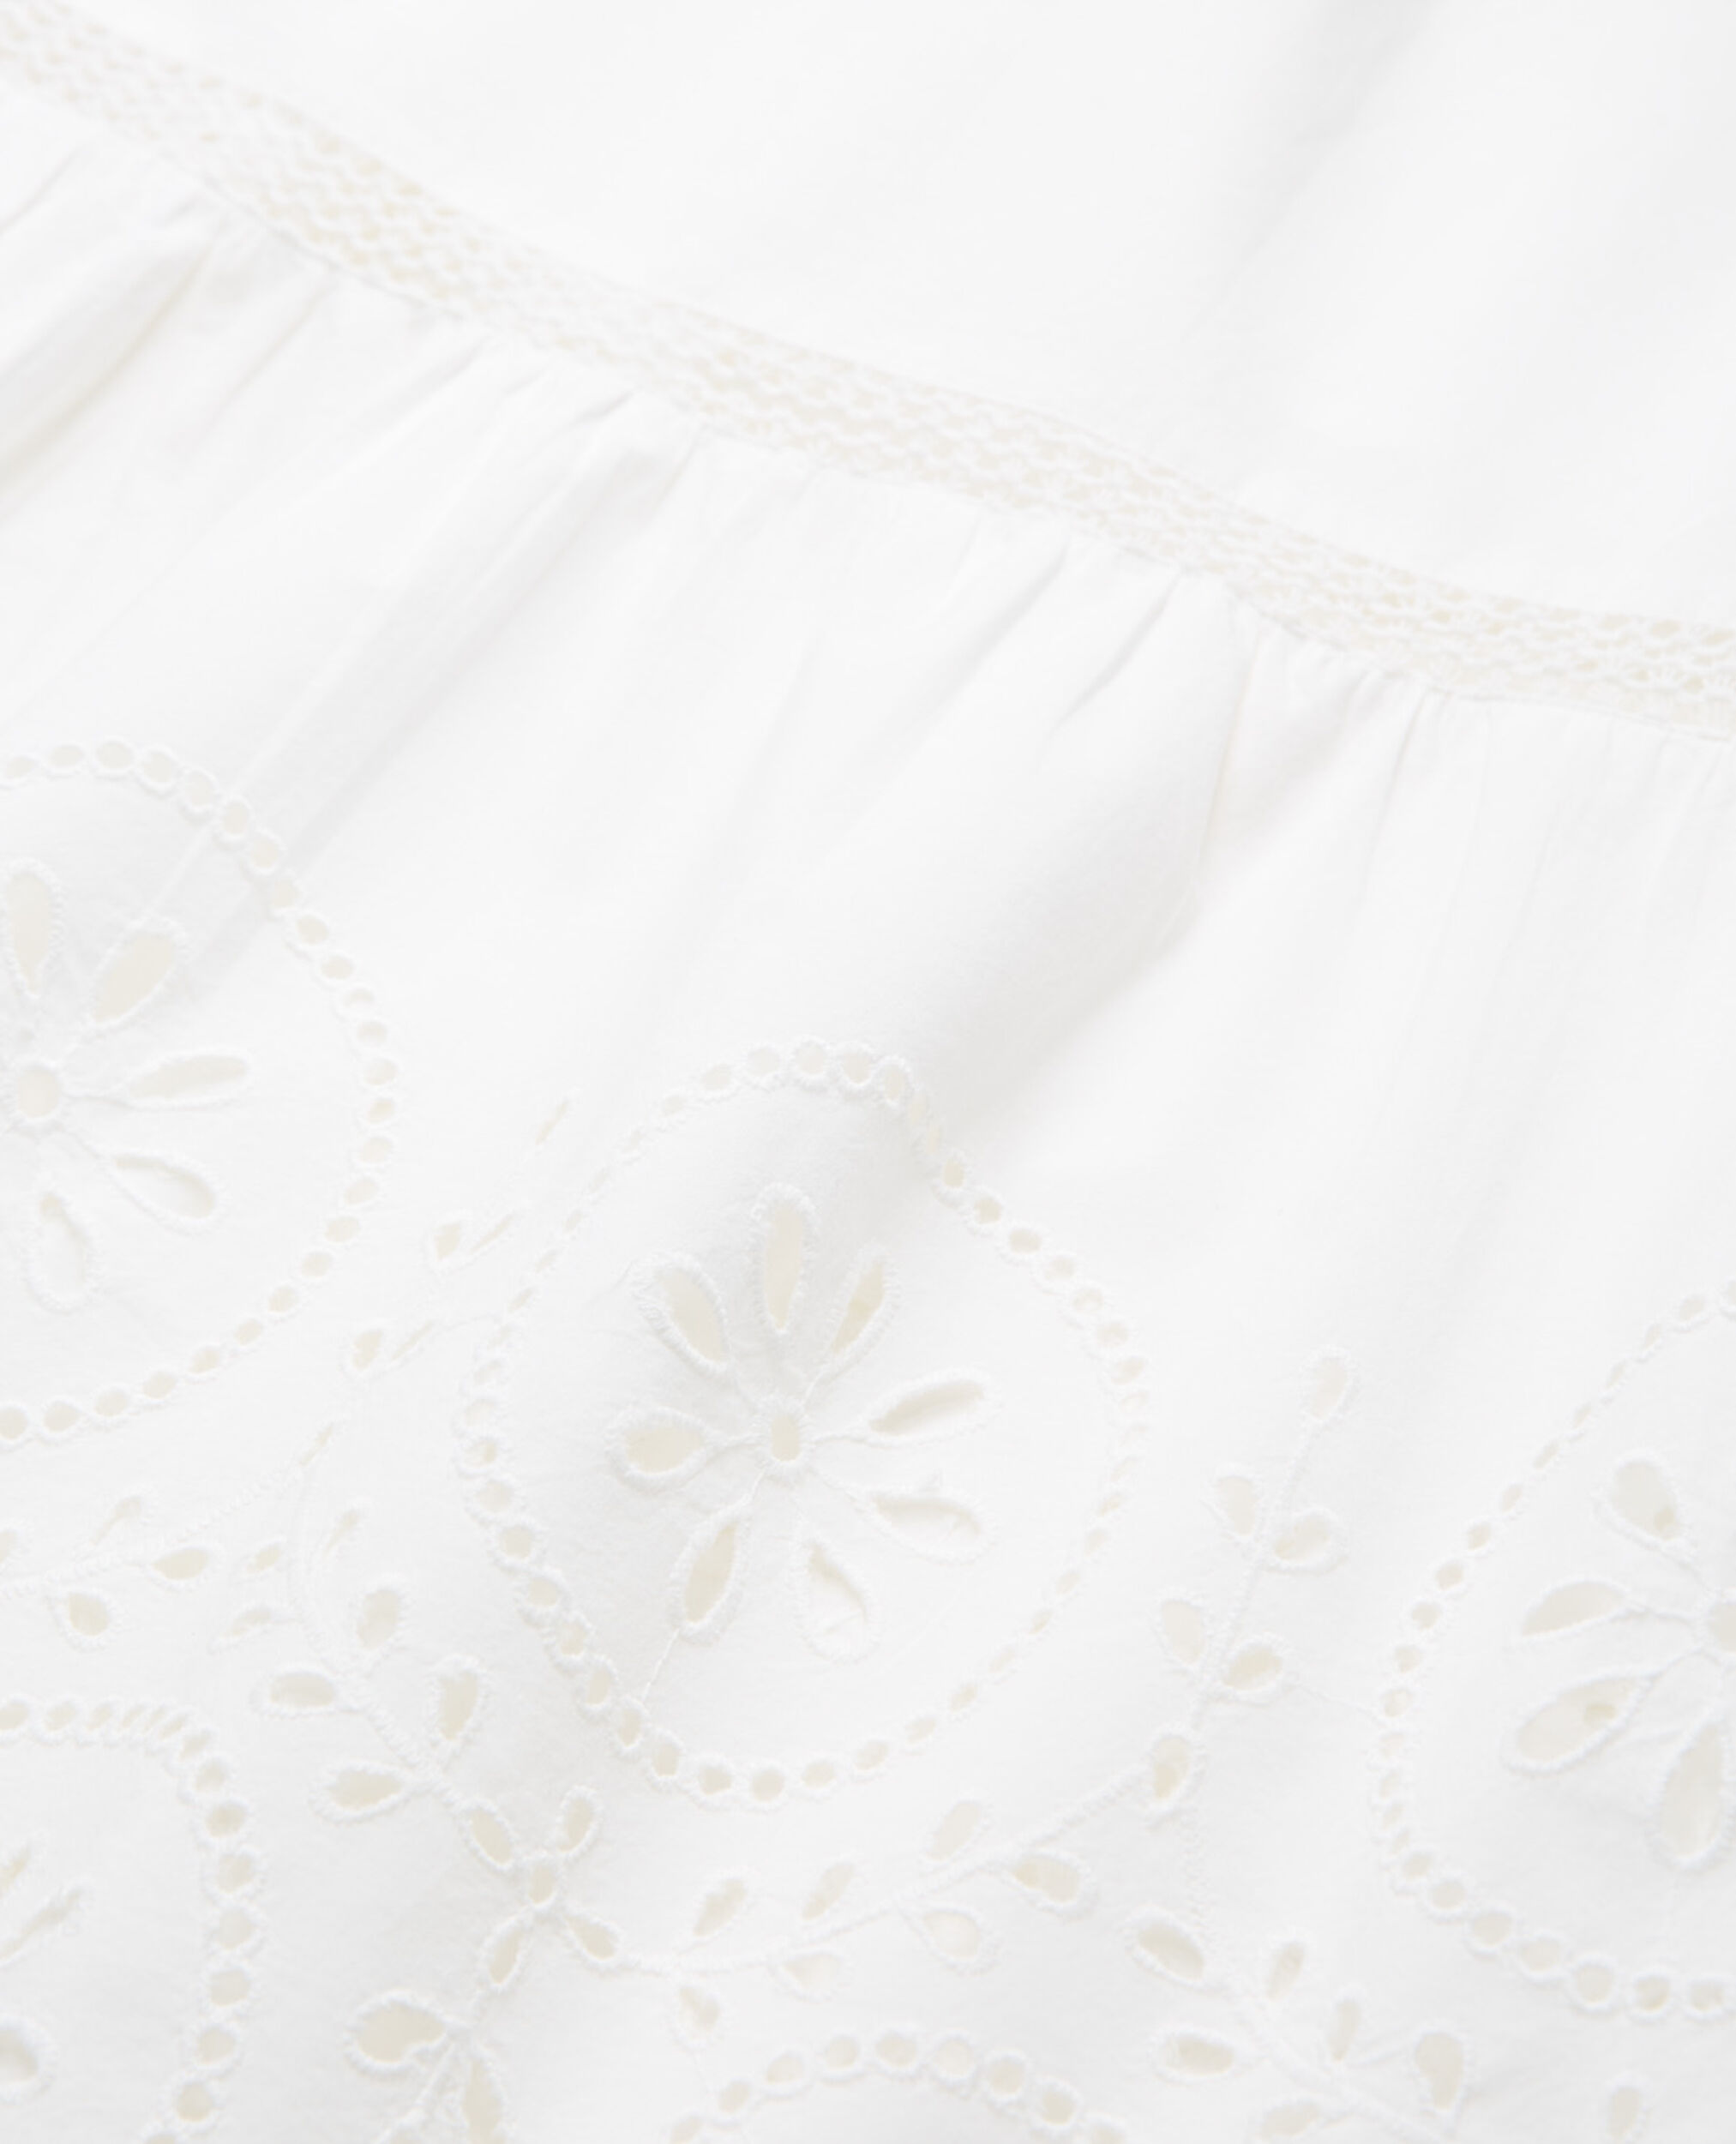 Long openwork white lace skirt, WHITE, hi-res image number null